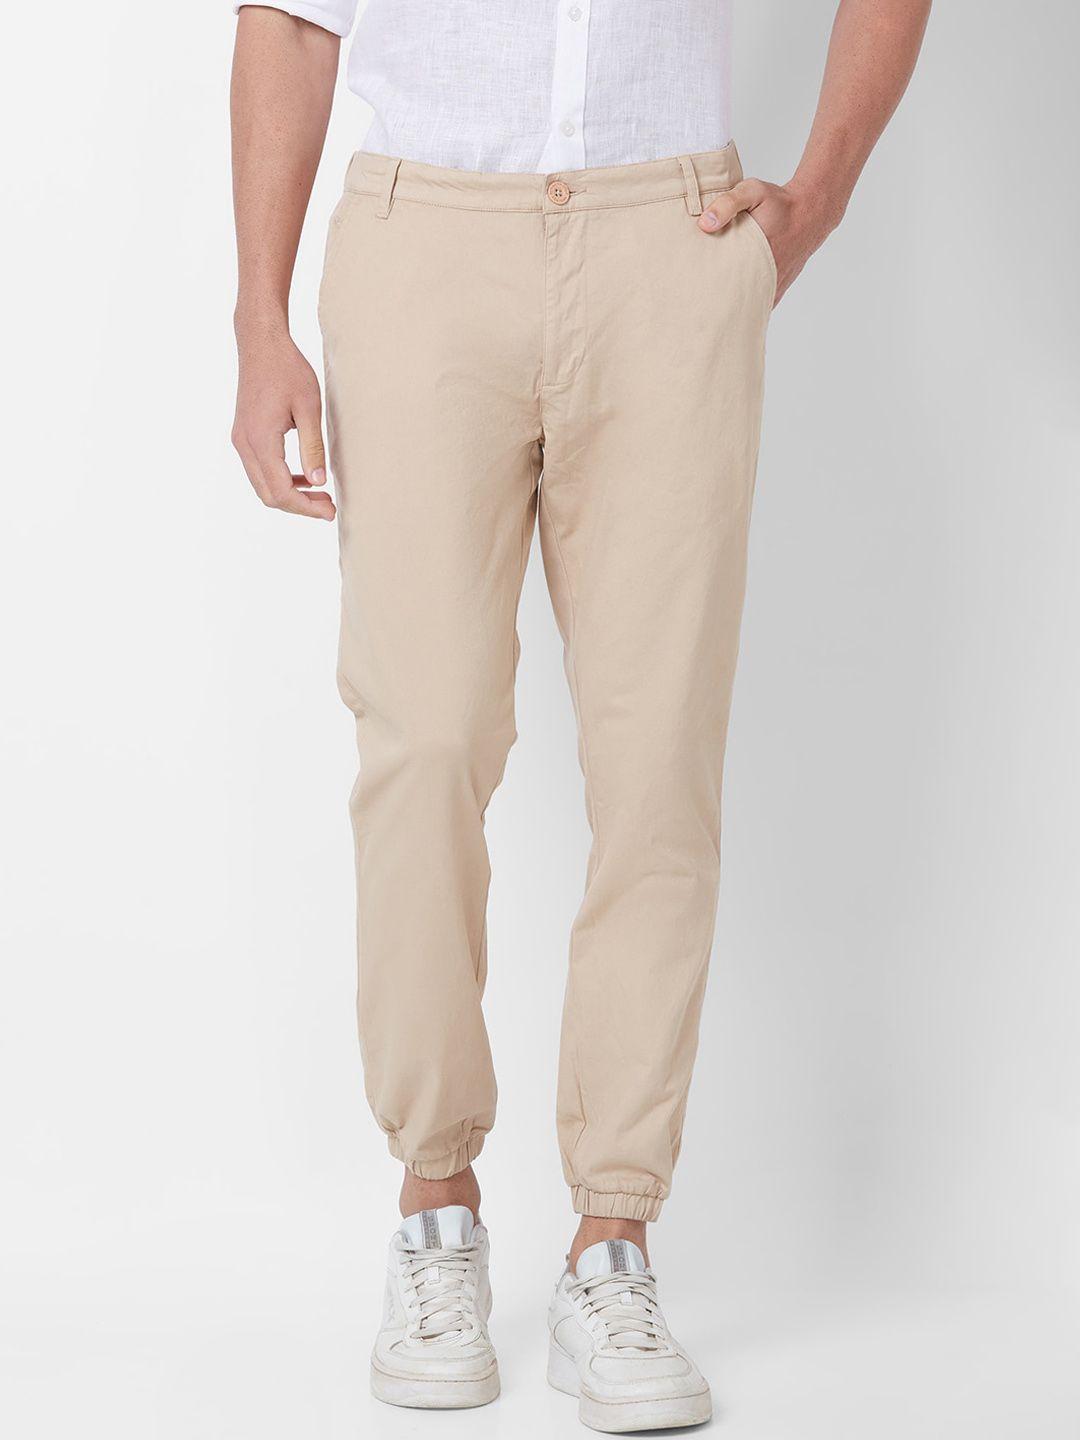 kenneth-cole-men-mid-rise-slim-fit-joggers